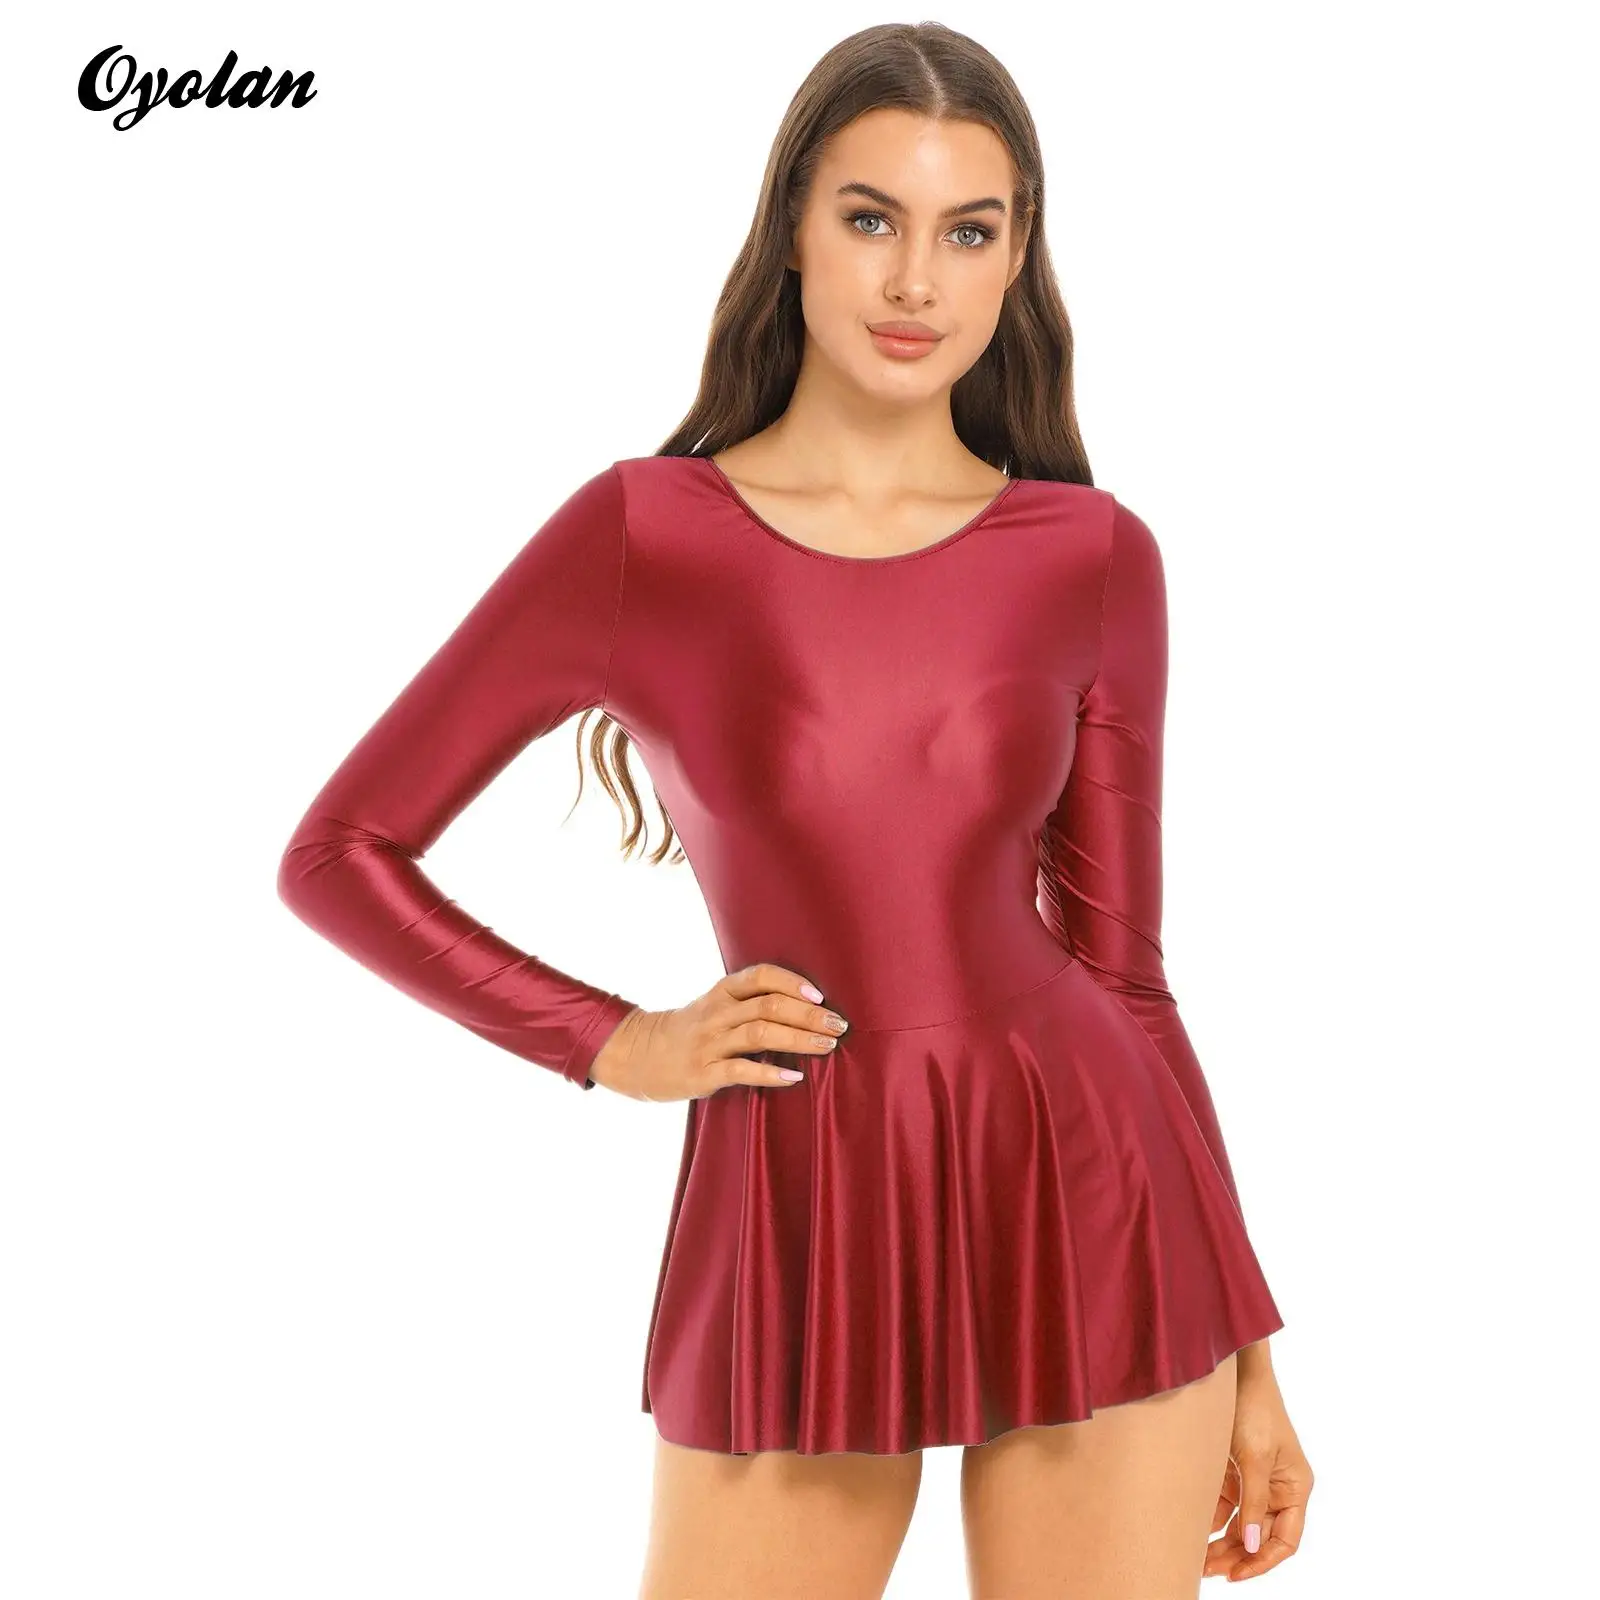 

Sexy Womens Oil Glossy Long Sleeve Ruffled Tank Dress Solid Color Round Neck Ballet Leotard Dresses Chemises Slim Fit Clubwear